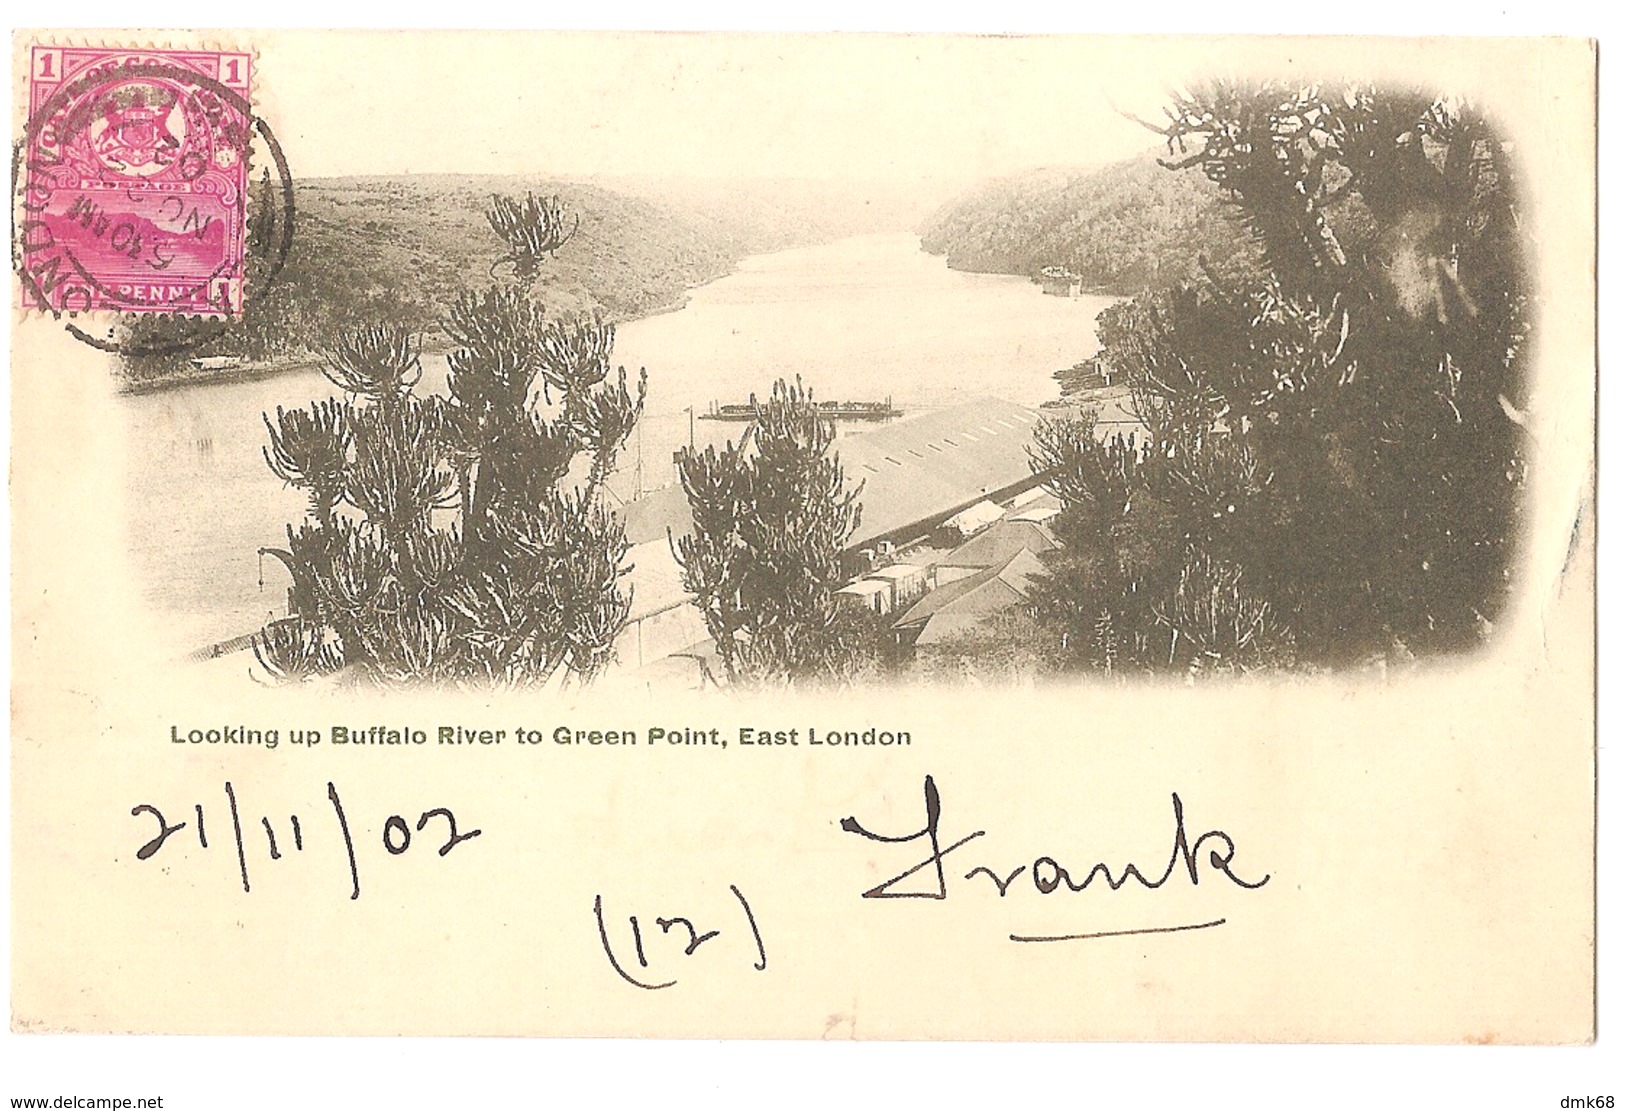 SOUTH AFRICA - EAST LONDON - LOOKING UP BUFFALO RIVER TO GREEN POINT - STAMP - MAILED TO ITALY 1902 - ( 2785) - Afrique Du Sud